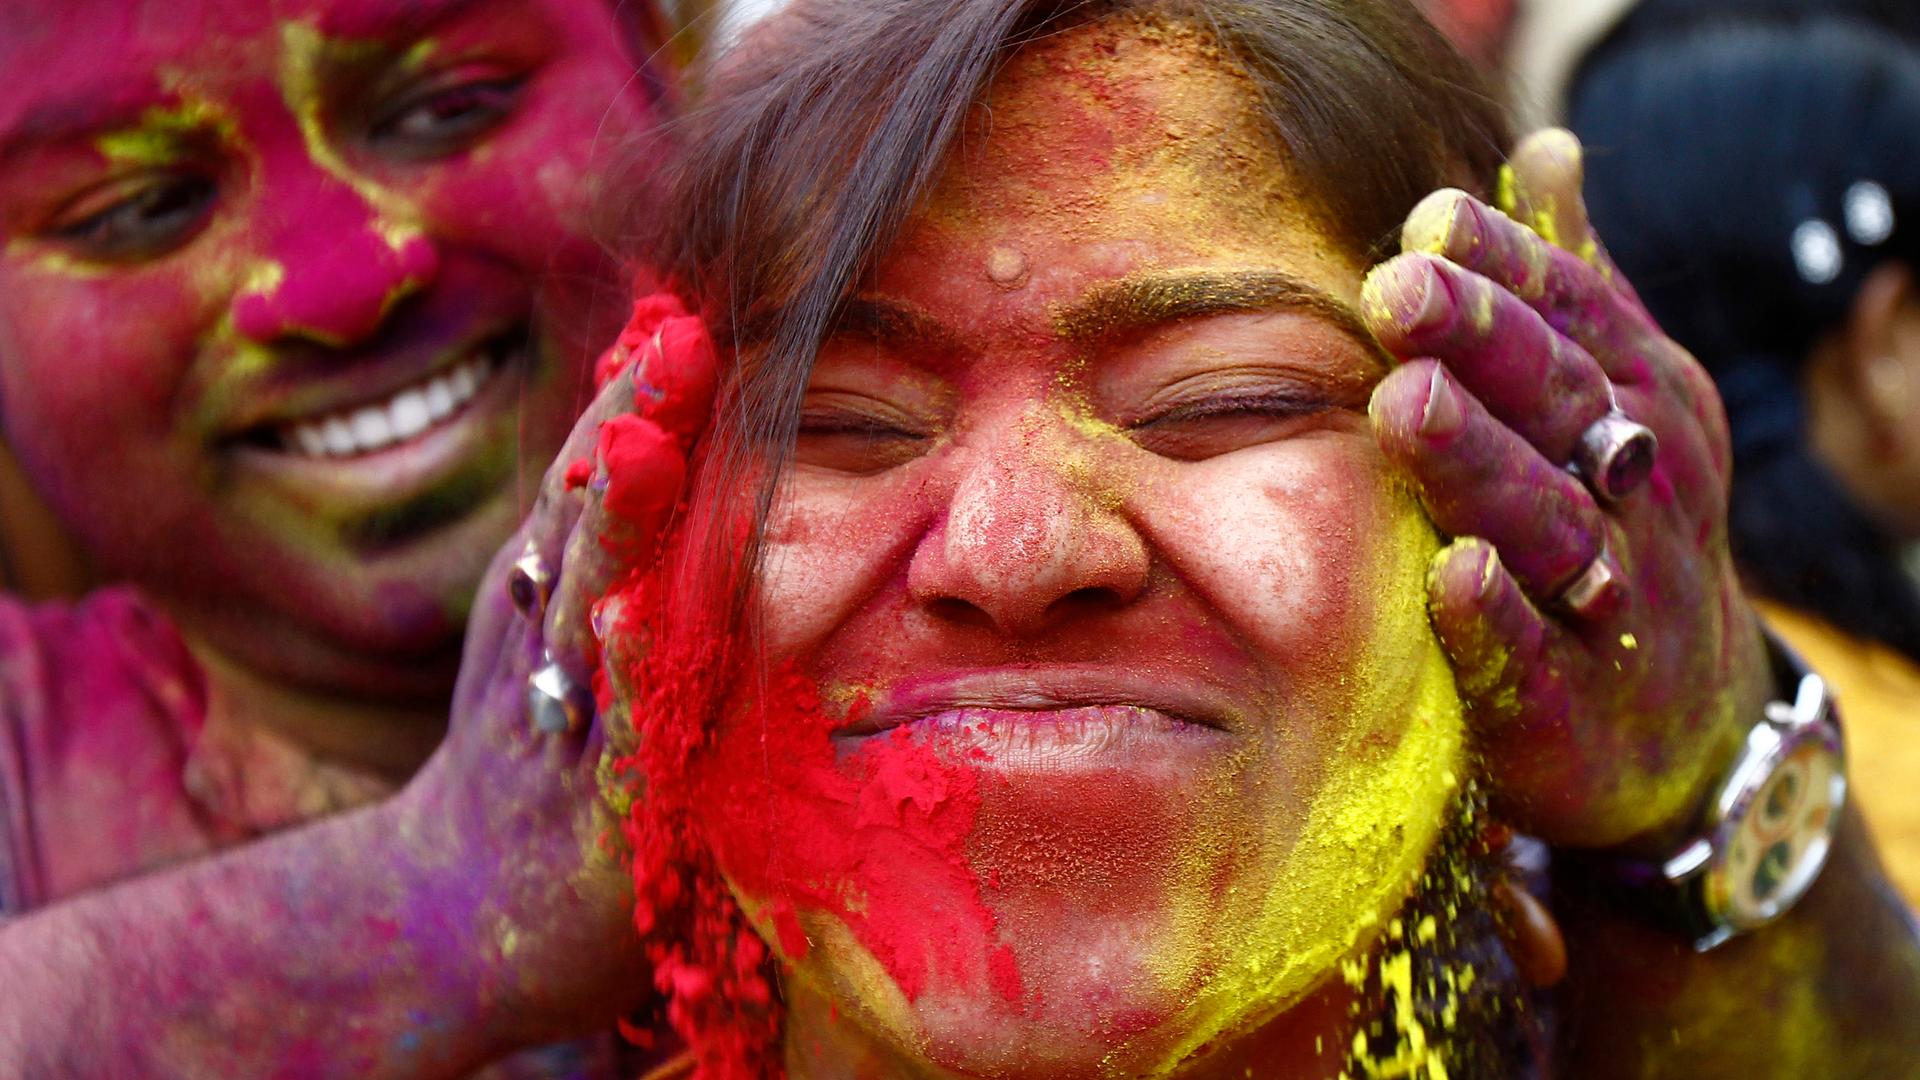 A student of Rabindra Bharati University reacts as her fellow student applies colored powder on her face during celebrations for Holi in Kolkata.